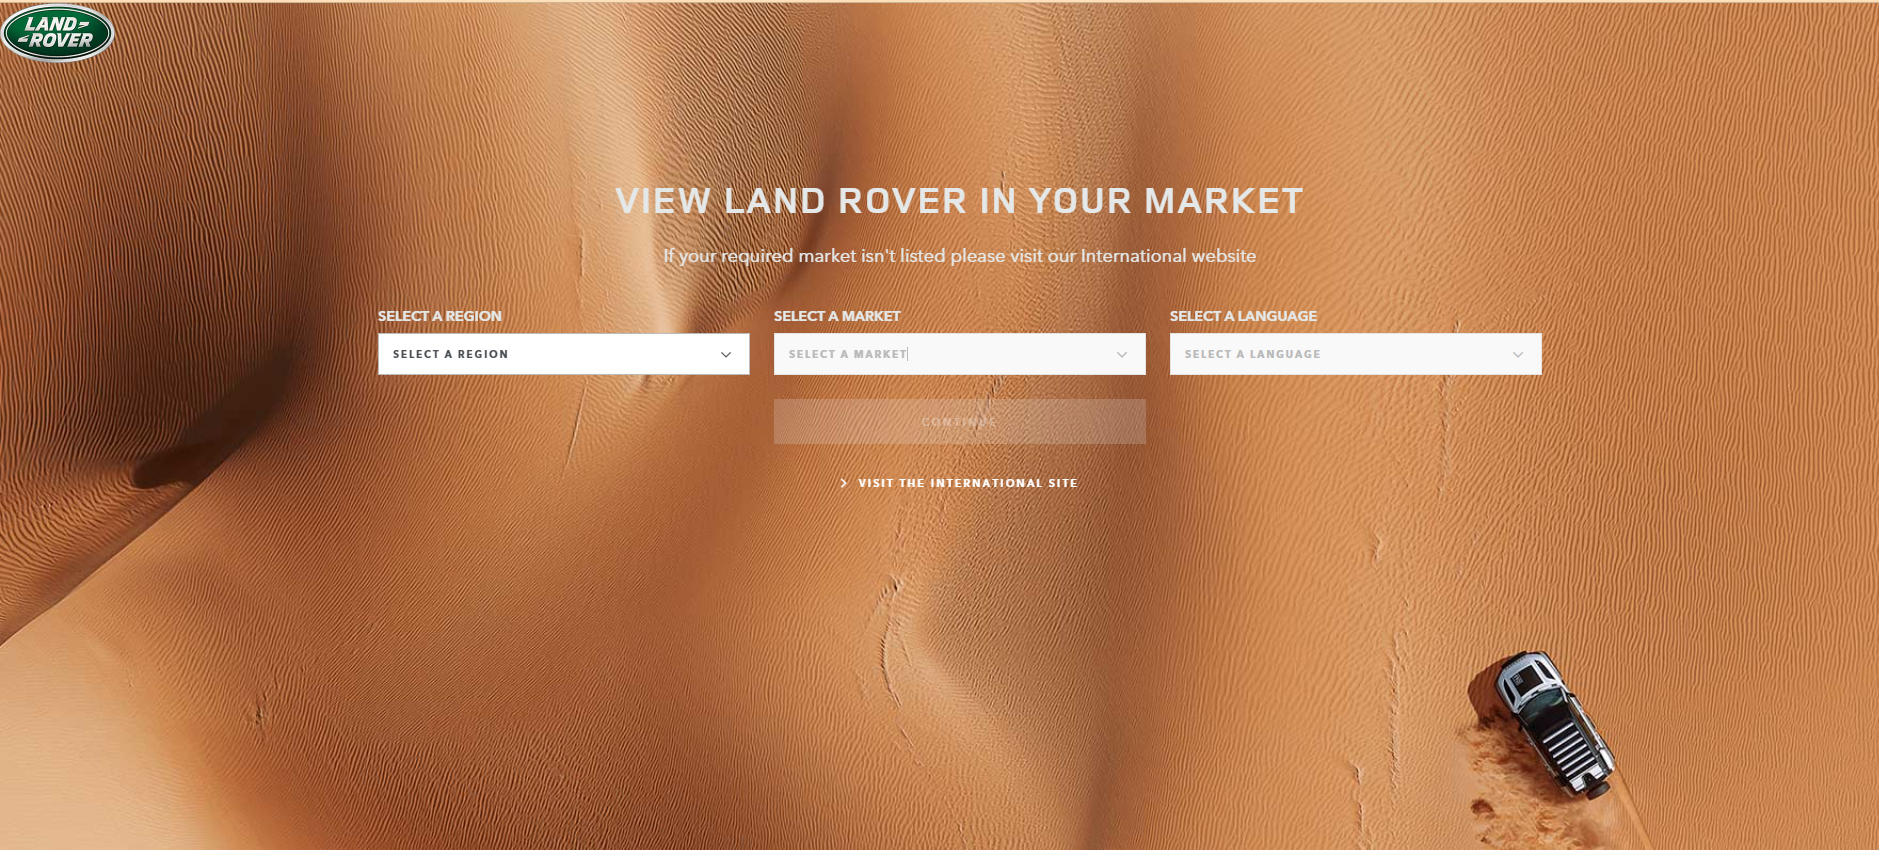 Land Rover is one of the most best magento 2 examples websites in automotive industry